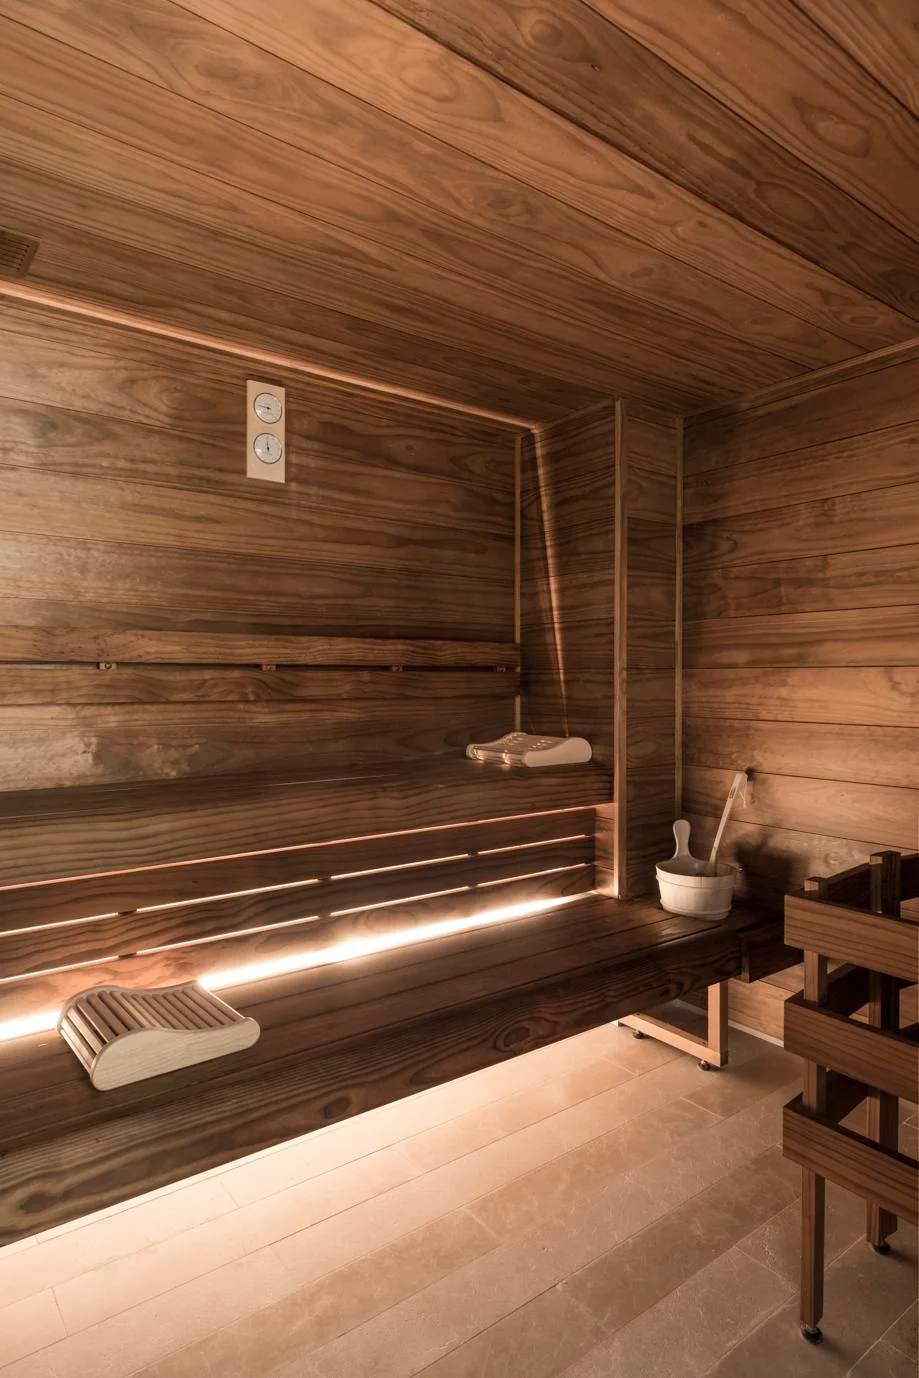 A tranquil sauna room at Grand Powers Paris, an eco-friendly hotel, featuring warm wooden panels, built-in bench seating, and soft lighting, creating a serene space for relaxation.